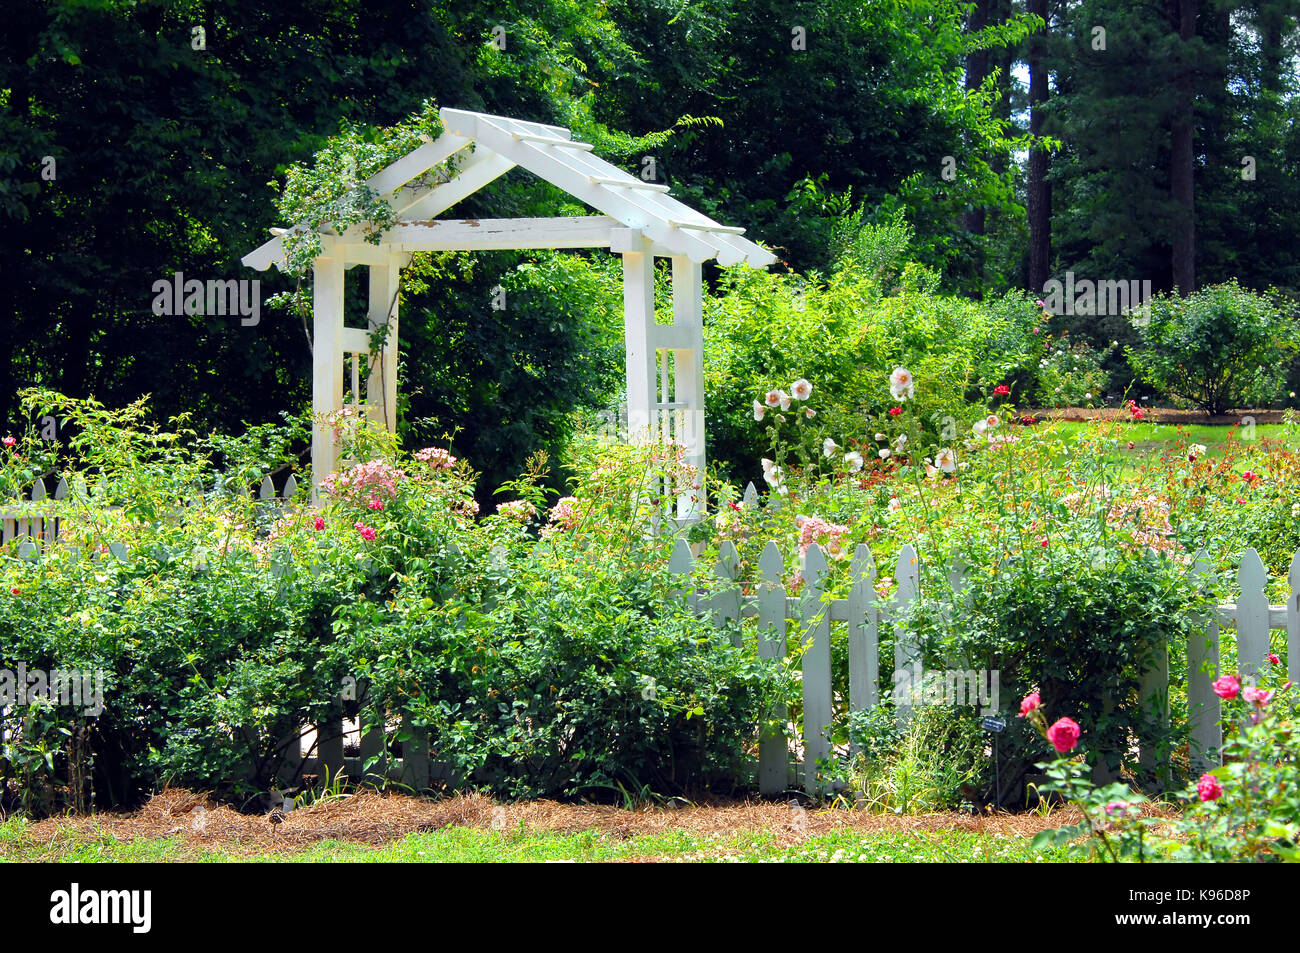 Gardens of the American Rose Center in Shreveport, Louisiana has beautiful landscaping with this white wooden pavillion and white picket fence.  Holly Stock Photo